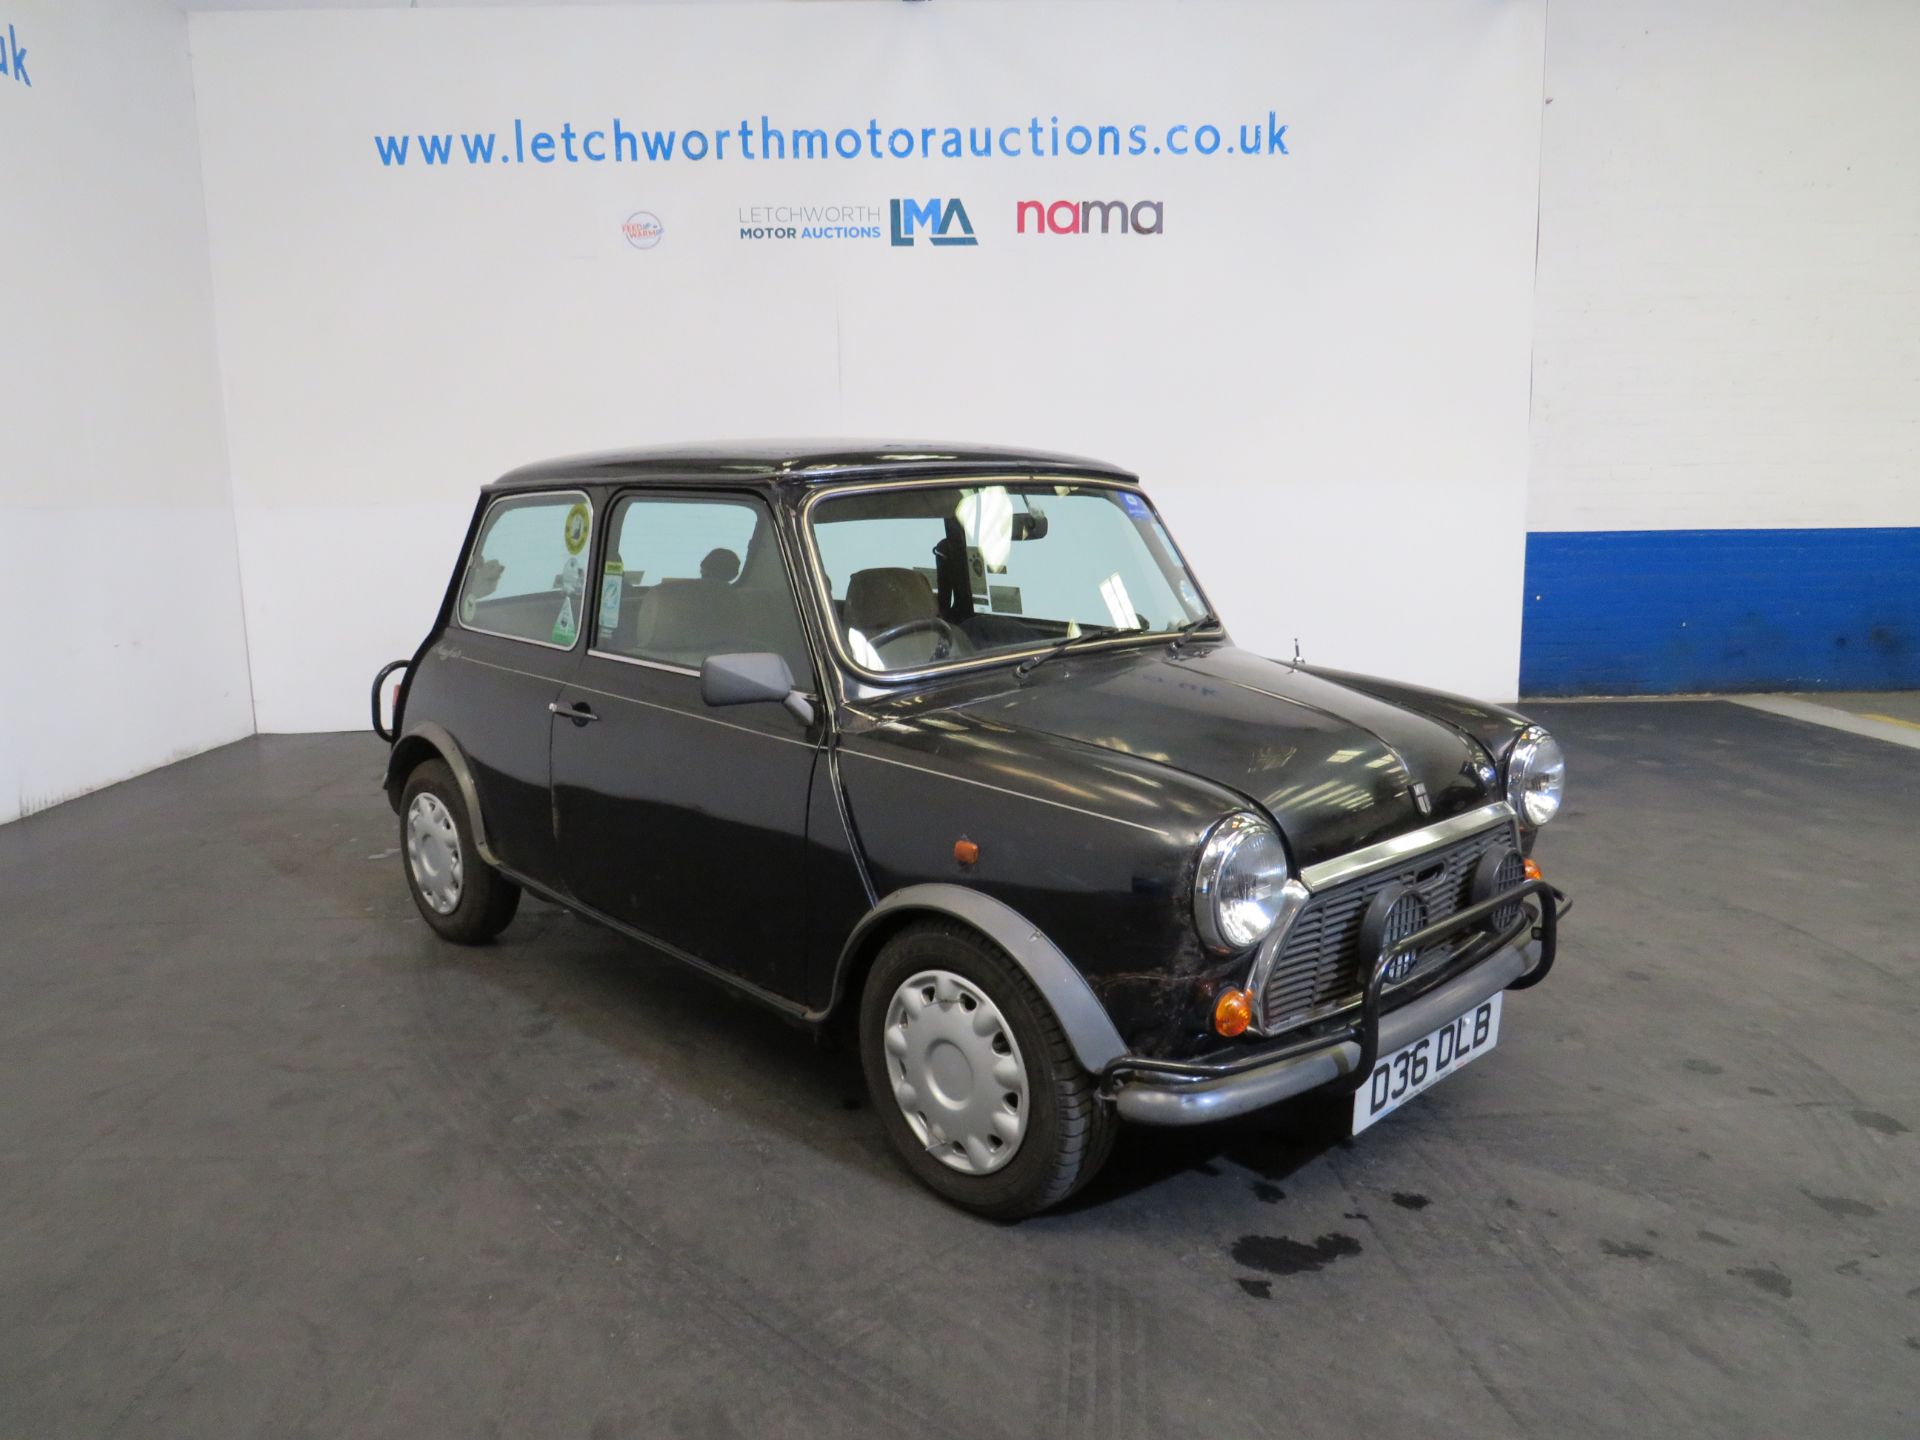 1987 Austin Mini Mayfair Auto - 998cc - ONE OWNER FROM NEW